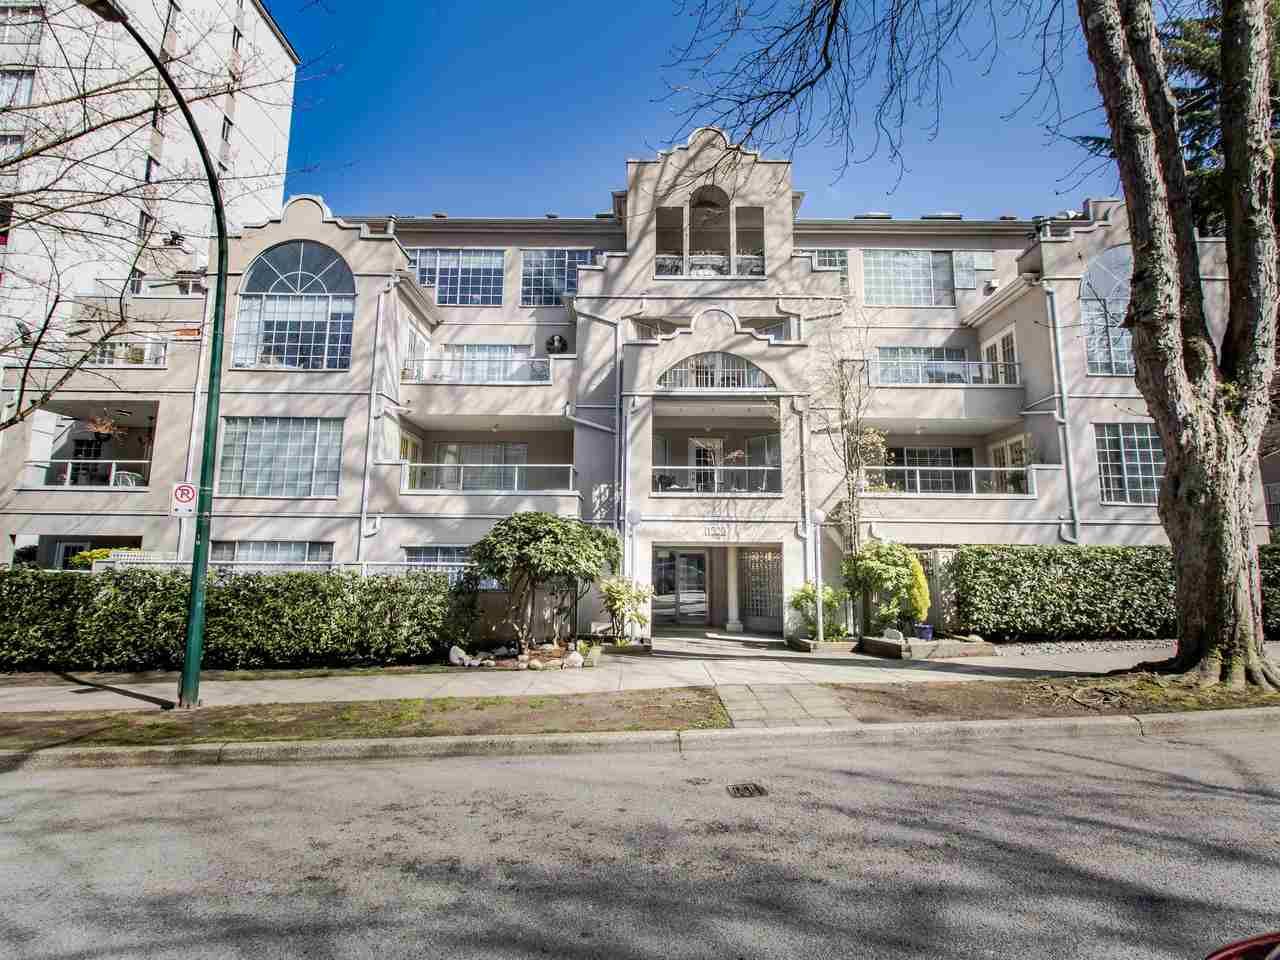 Main Photo: 308 1525 PENDRELL STREET in : West End VW Condo for sale (Vancouver West)  : MLS®# R2519300